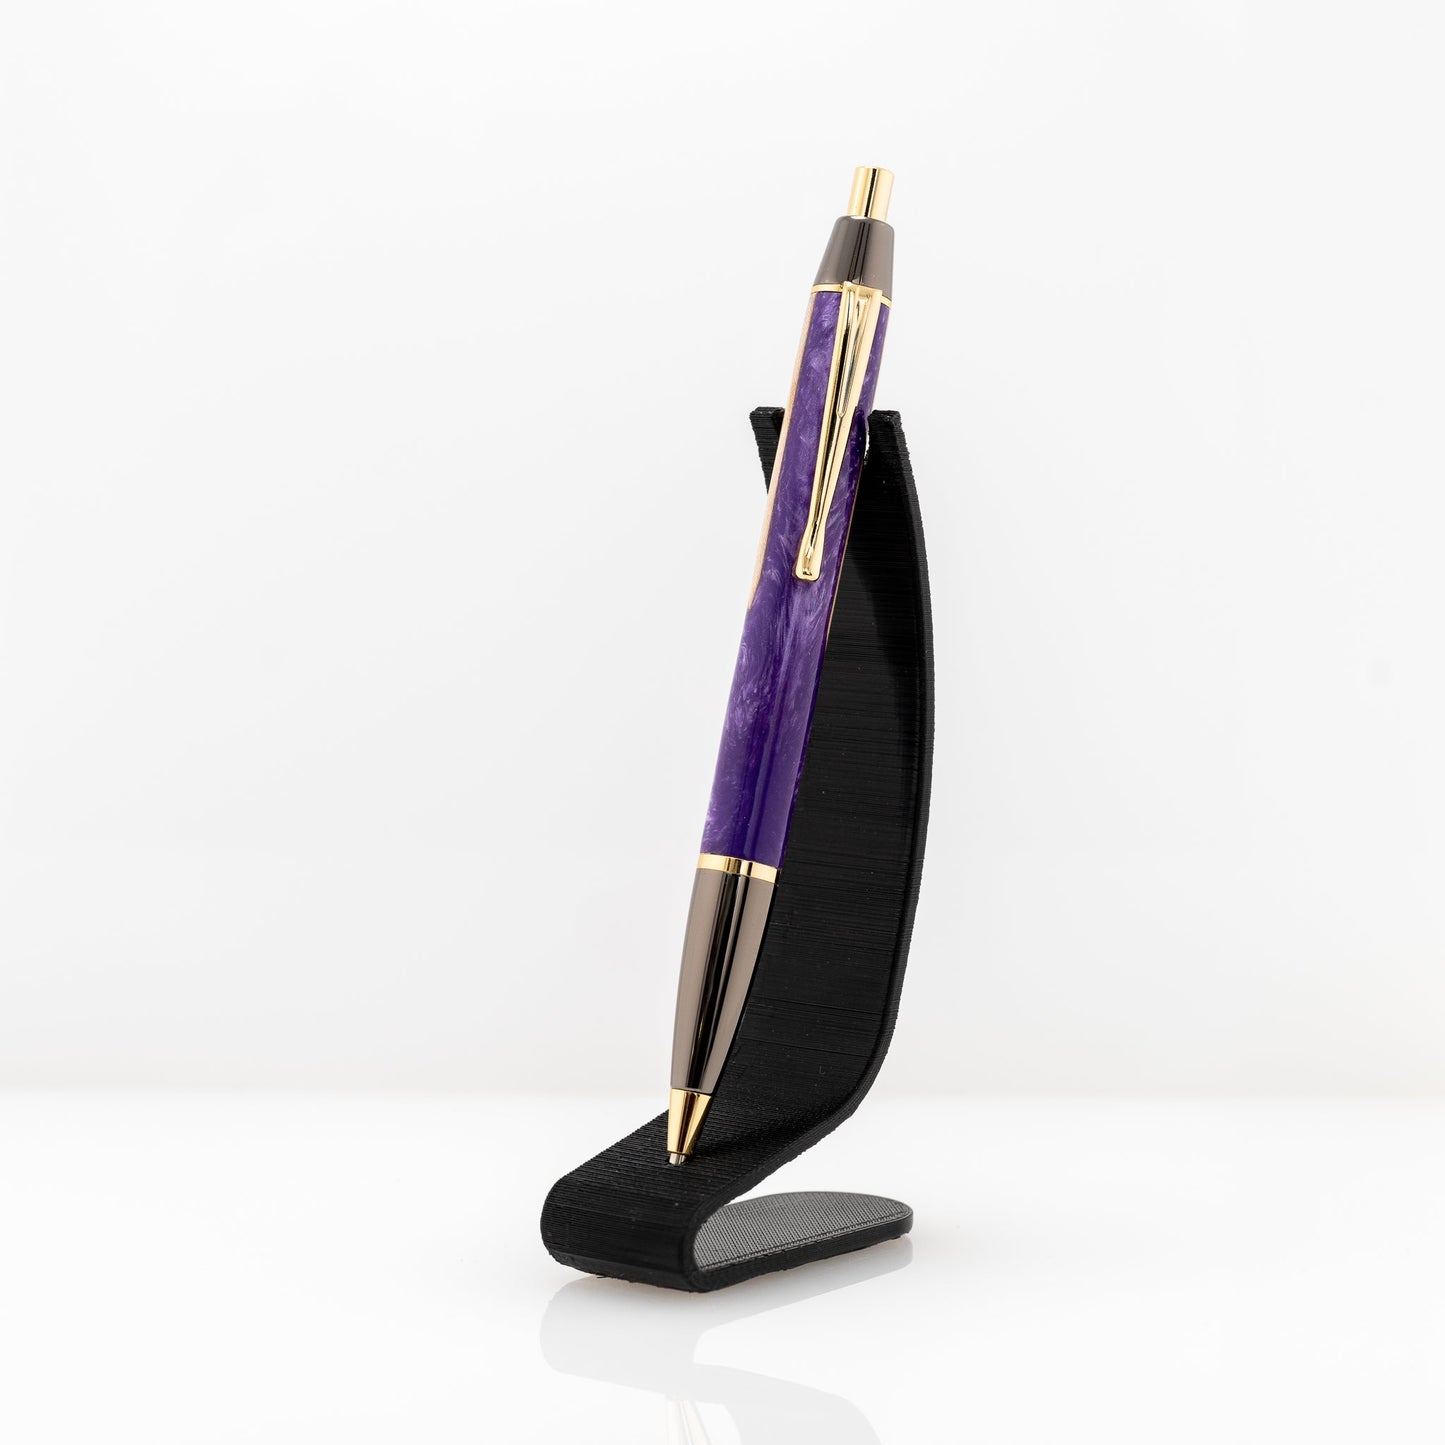 Handmade click pen with Maple wood surrounded by purple sparkle resin with gold and gunmetal plating